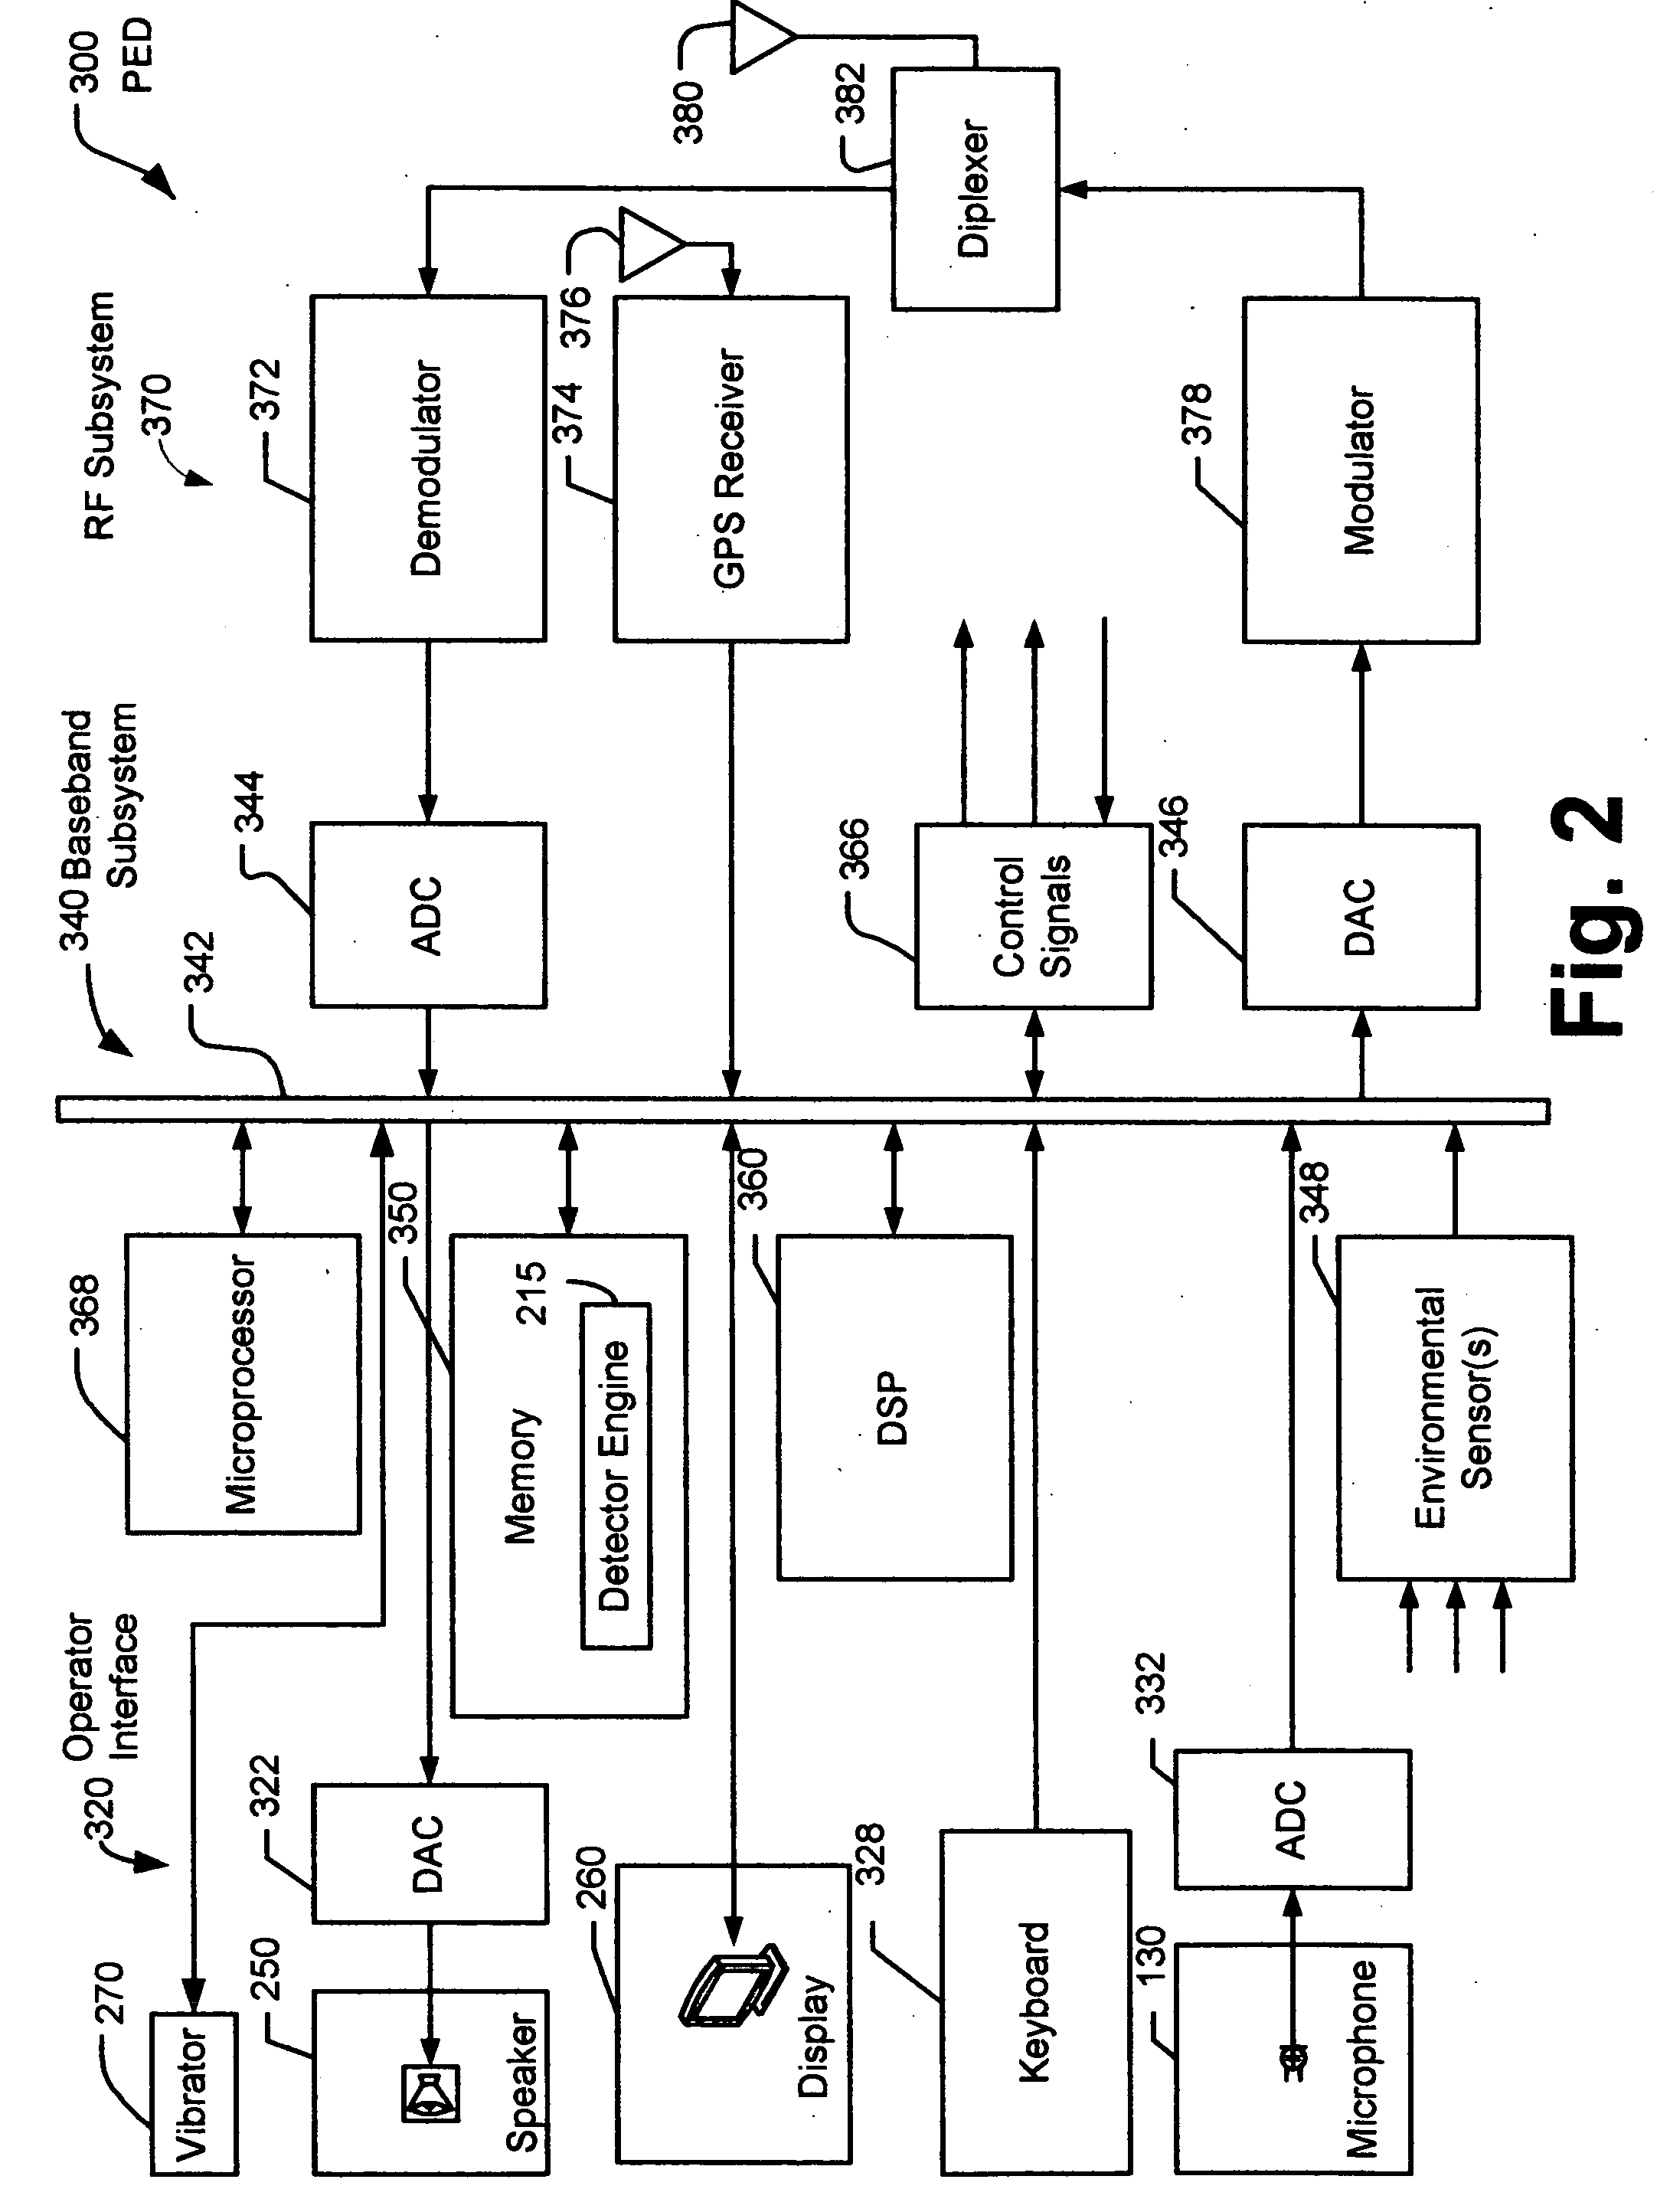 Sensory enhancement systems and methods in personal electronic devices